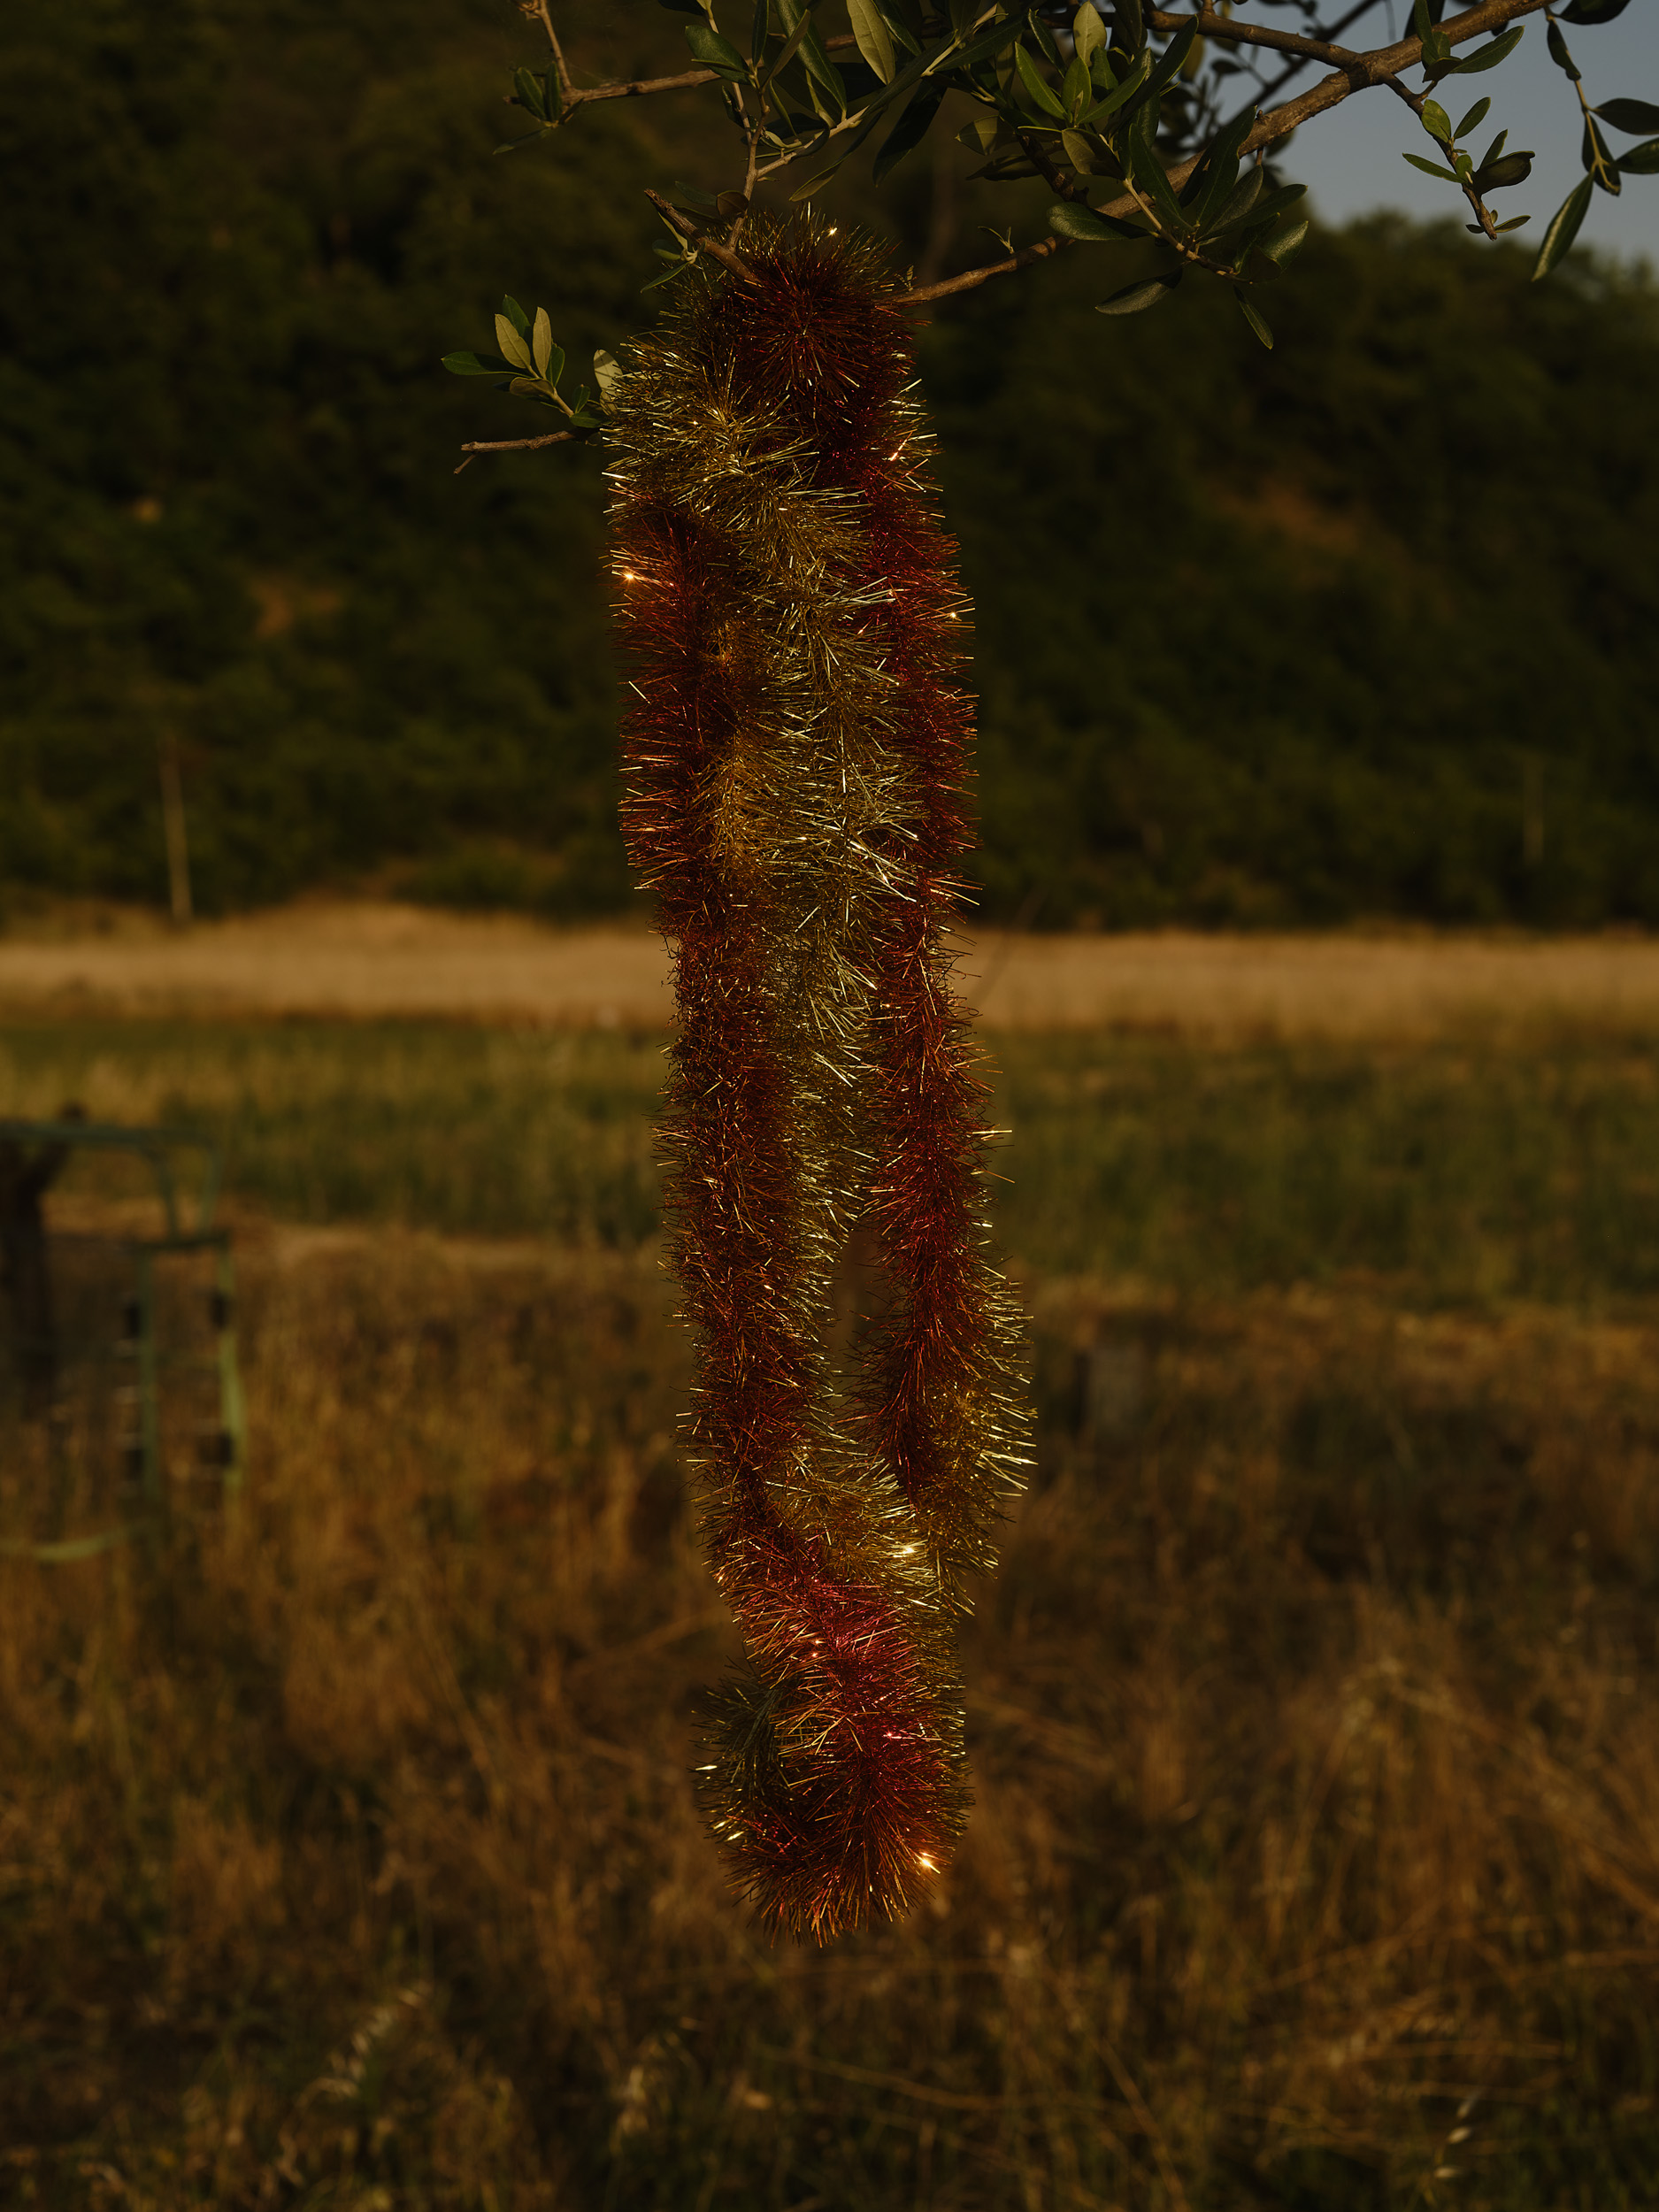 tinsel hangs from a tree